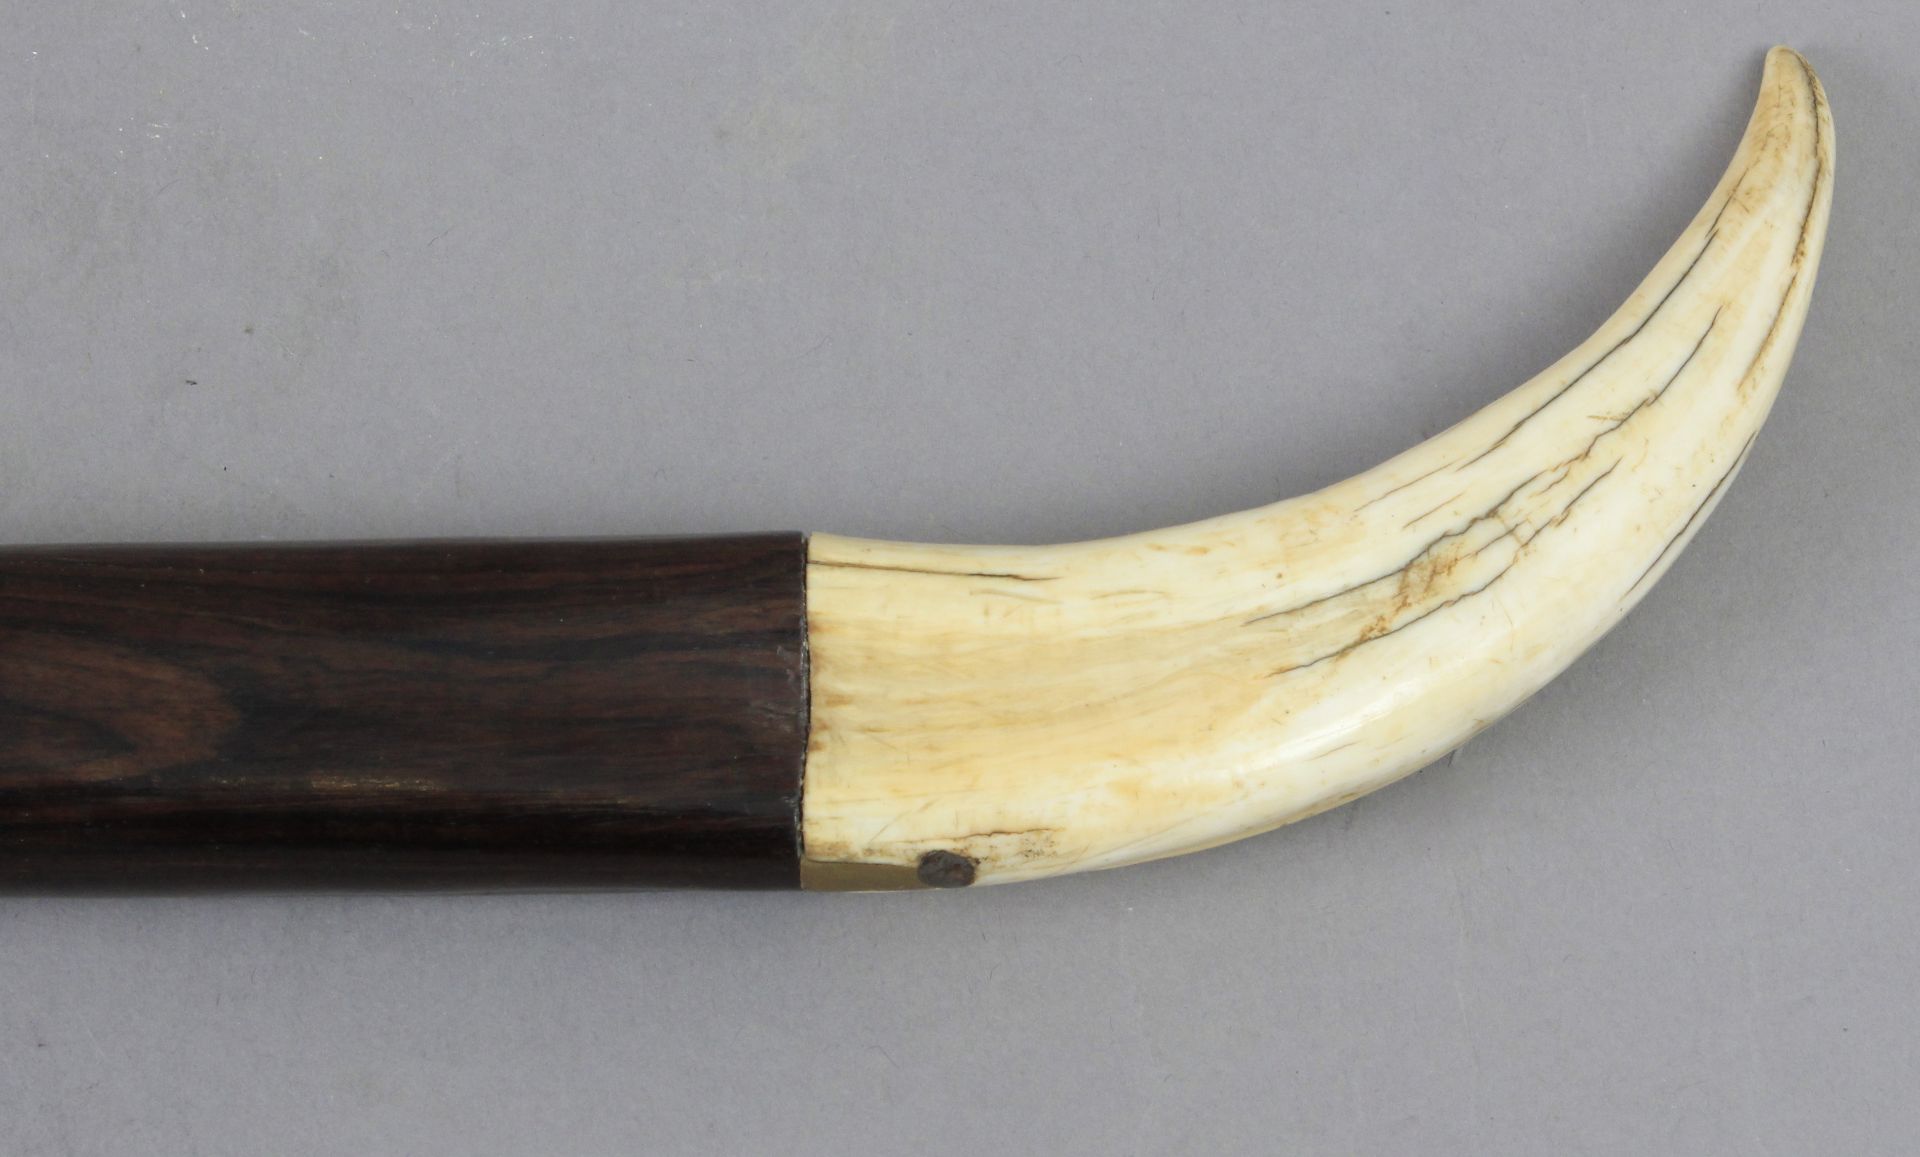 A 19th century cherry tree wood walking cane with a warthog tusk handle